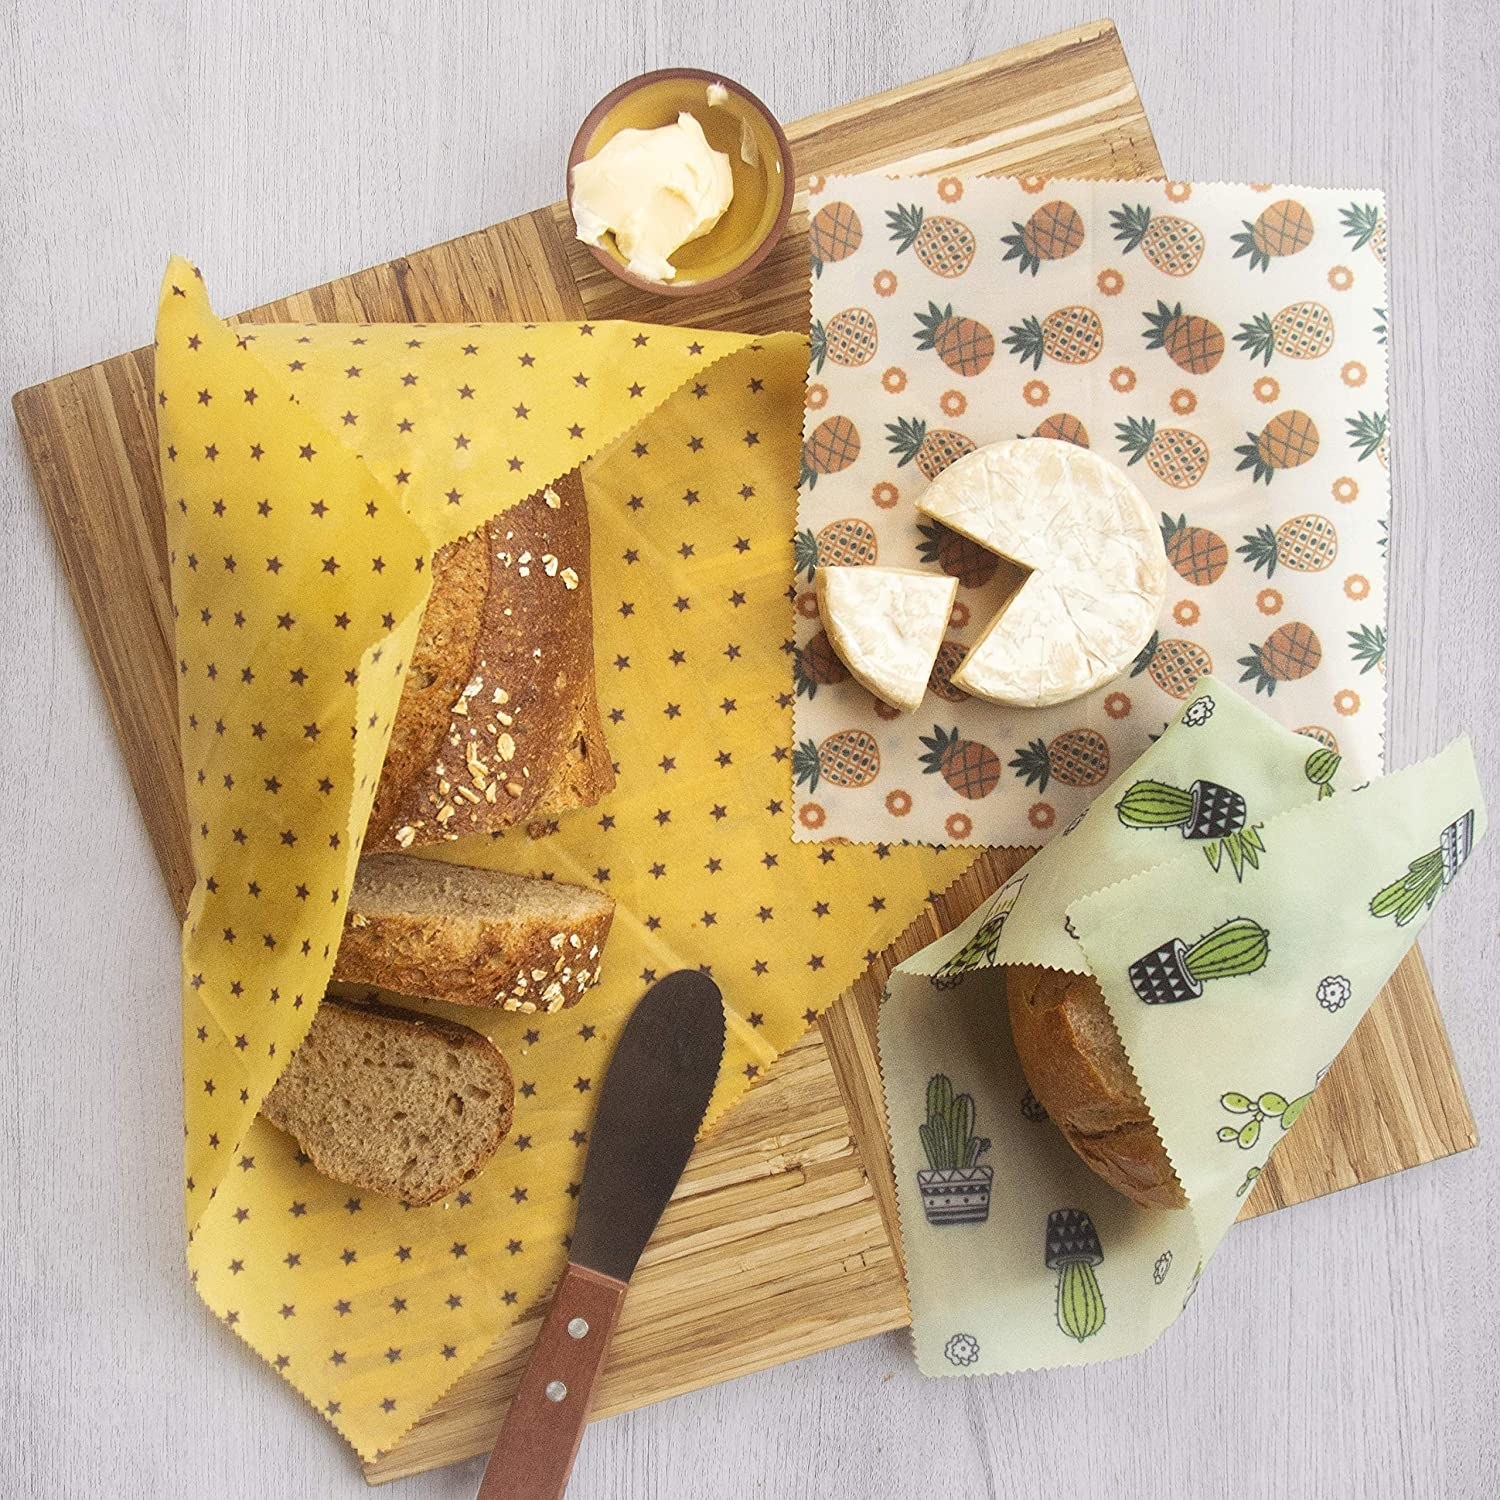 cute wax wraps covering various ingredients on a cutting board